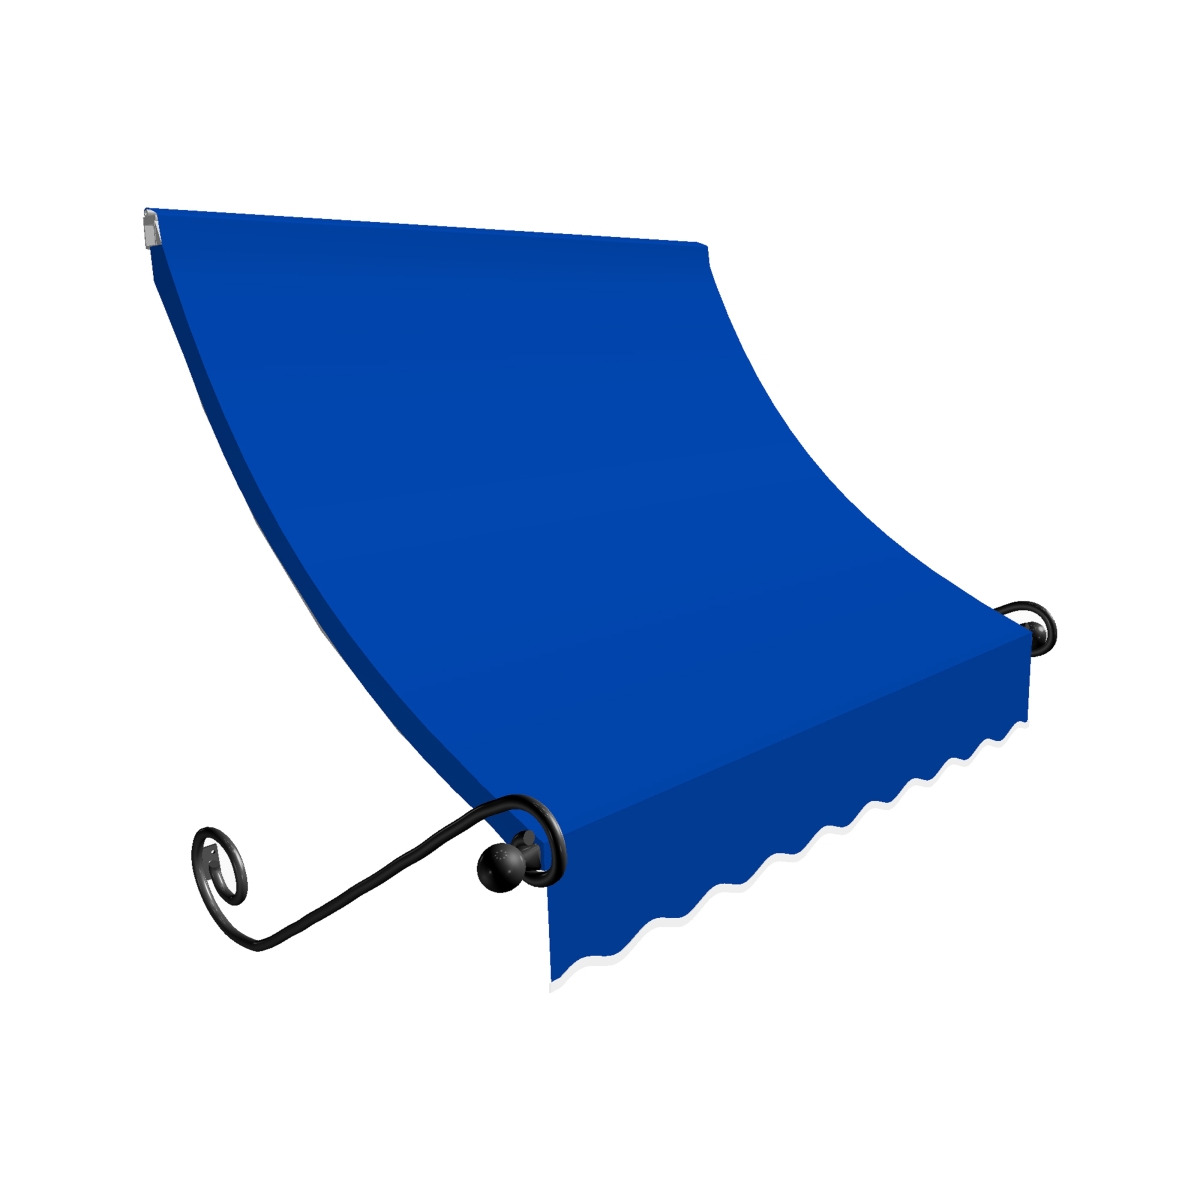 Ch33-us-3bb 3.38 Ft. Charleston Window & Entry Awning, Bright Blue - 44 X 36 In.